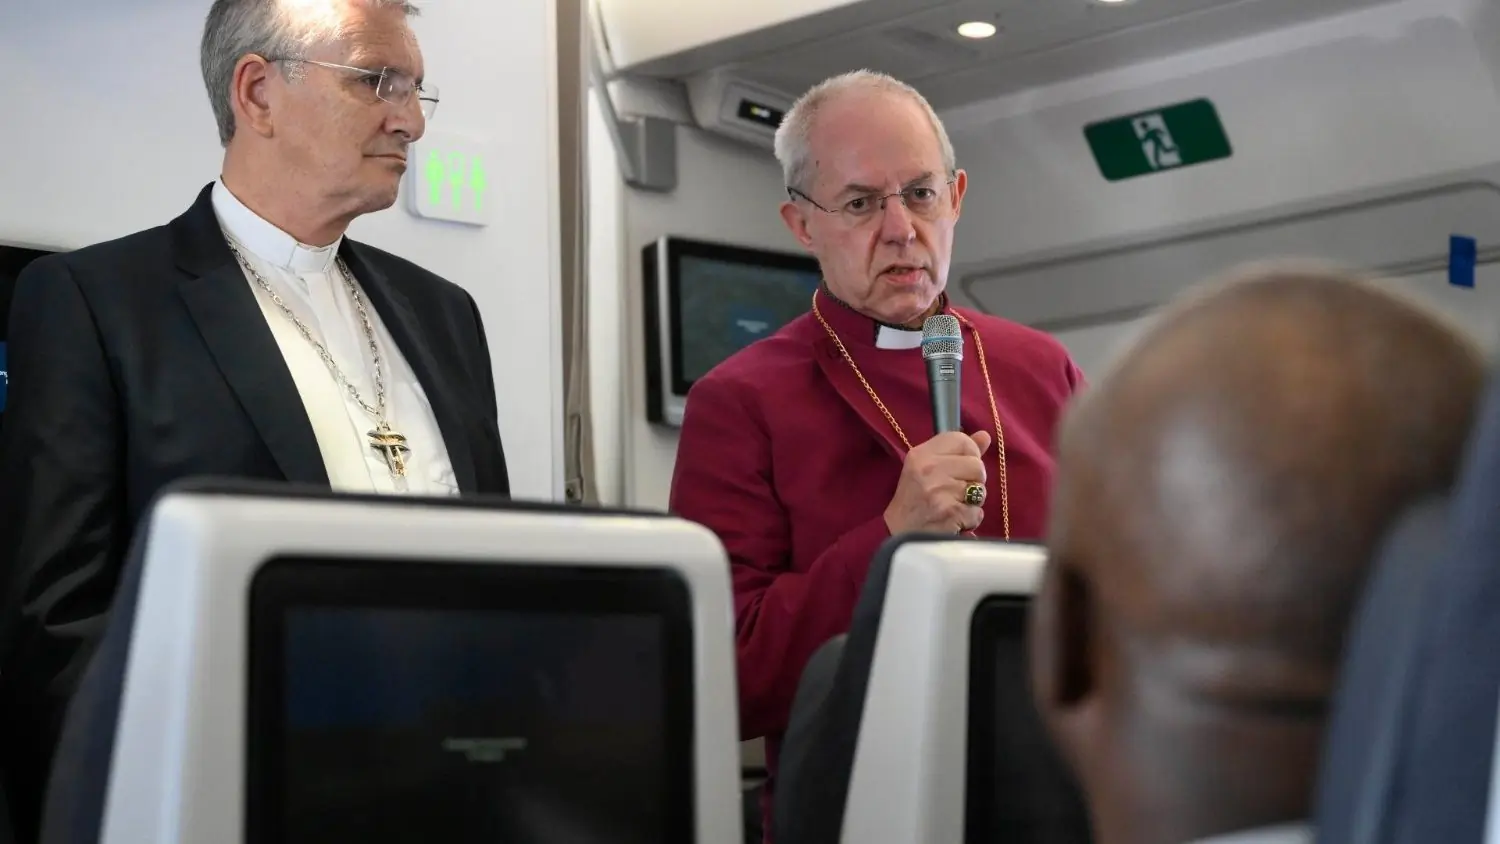 Anglican Archbishop Justin Welby (R) with Rt. Rev. Iain Greenshields aboard the papal plane